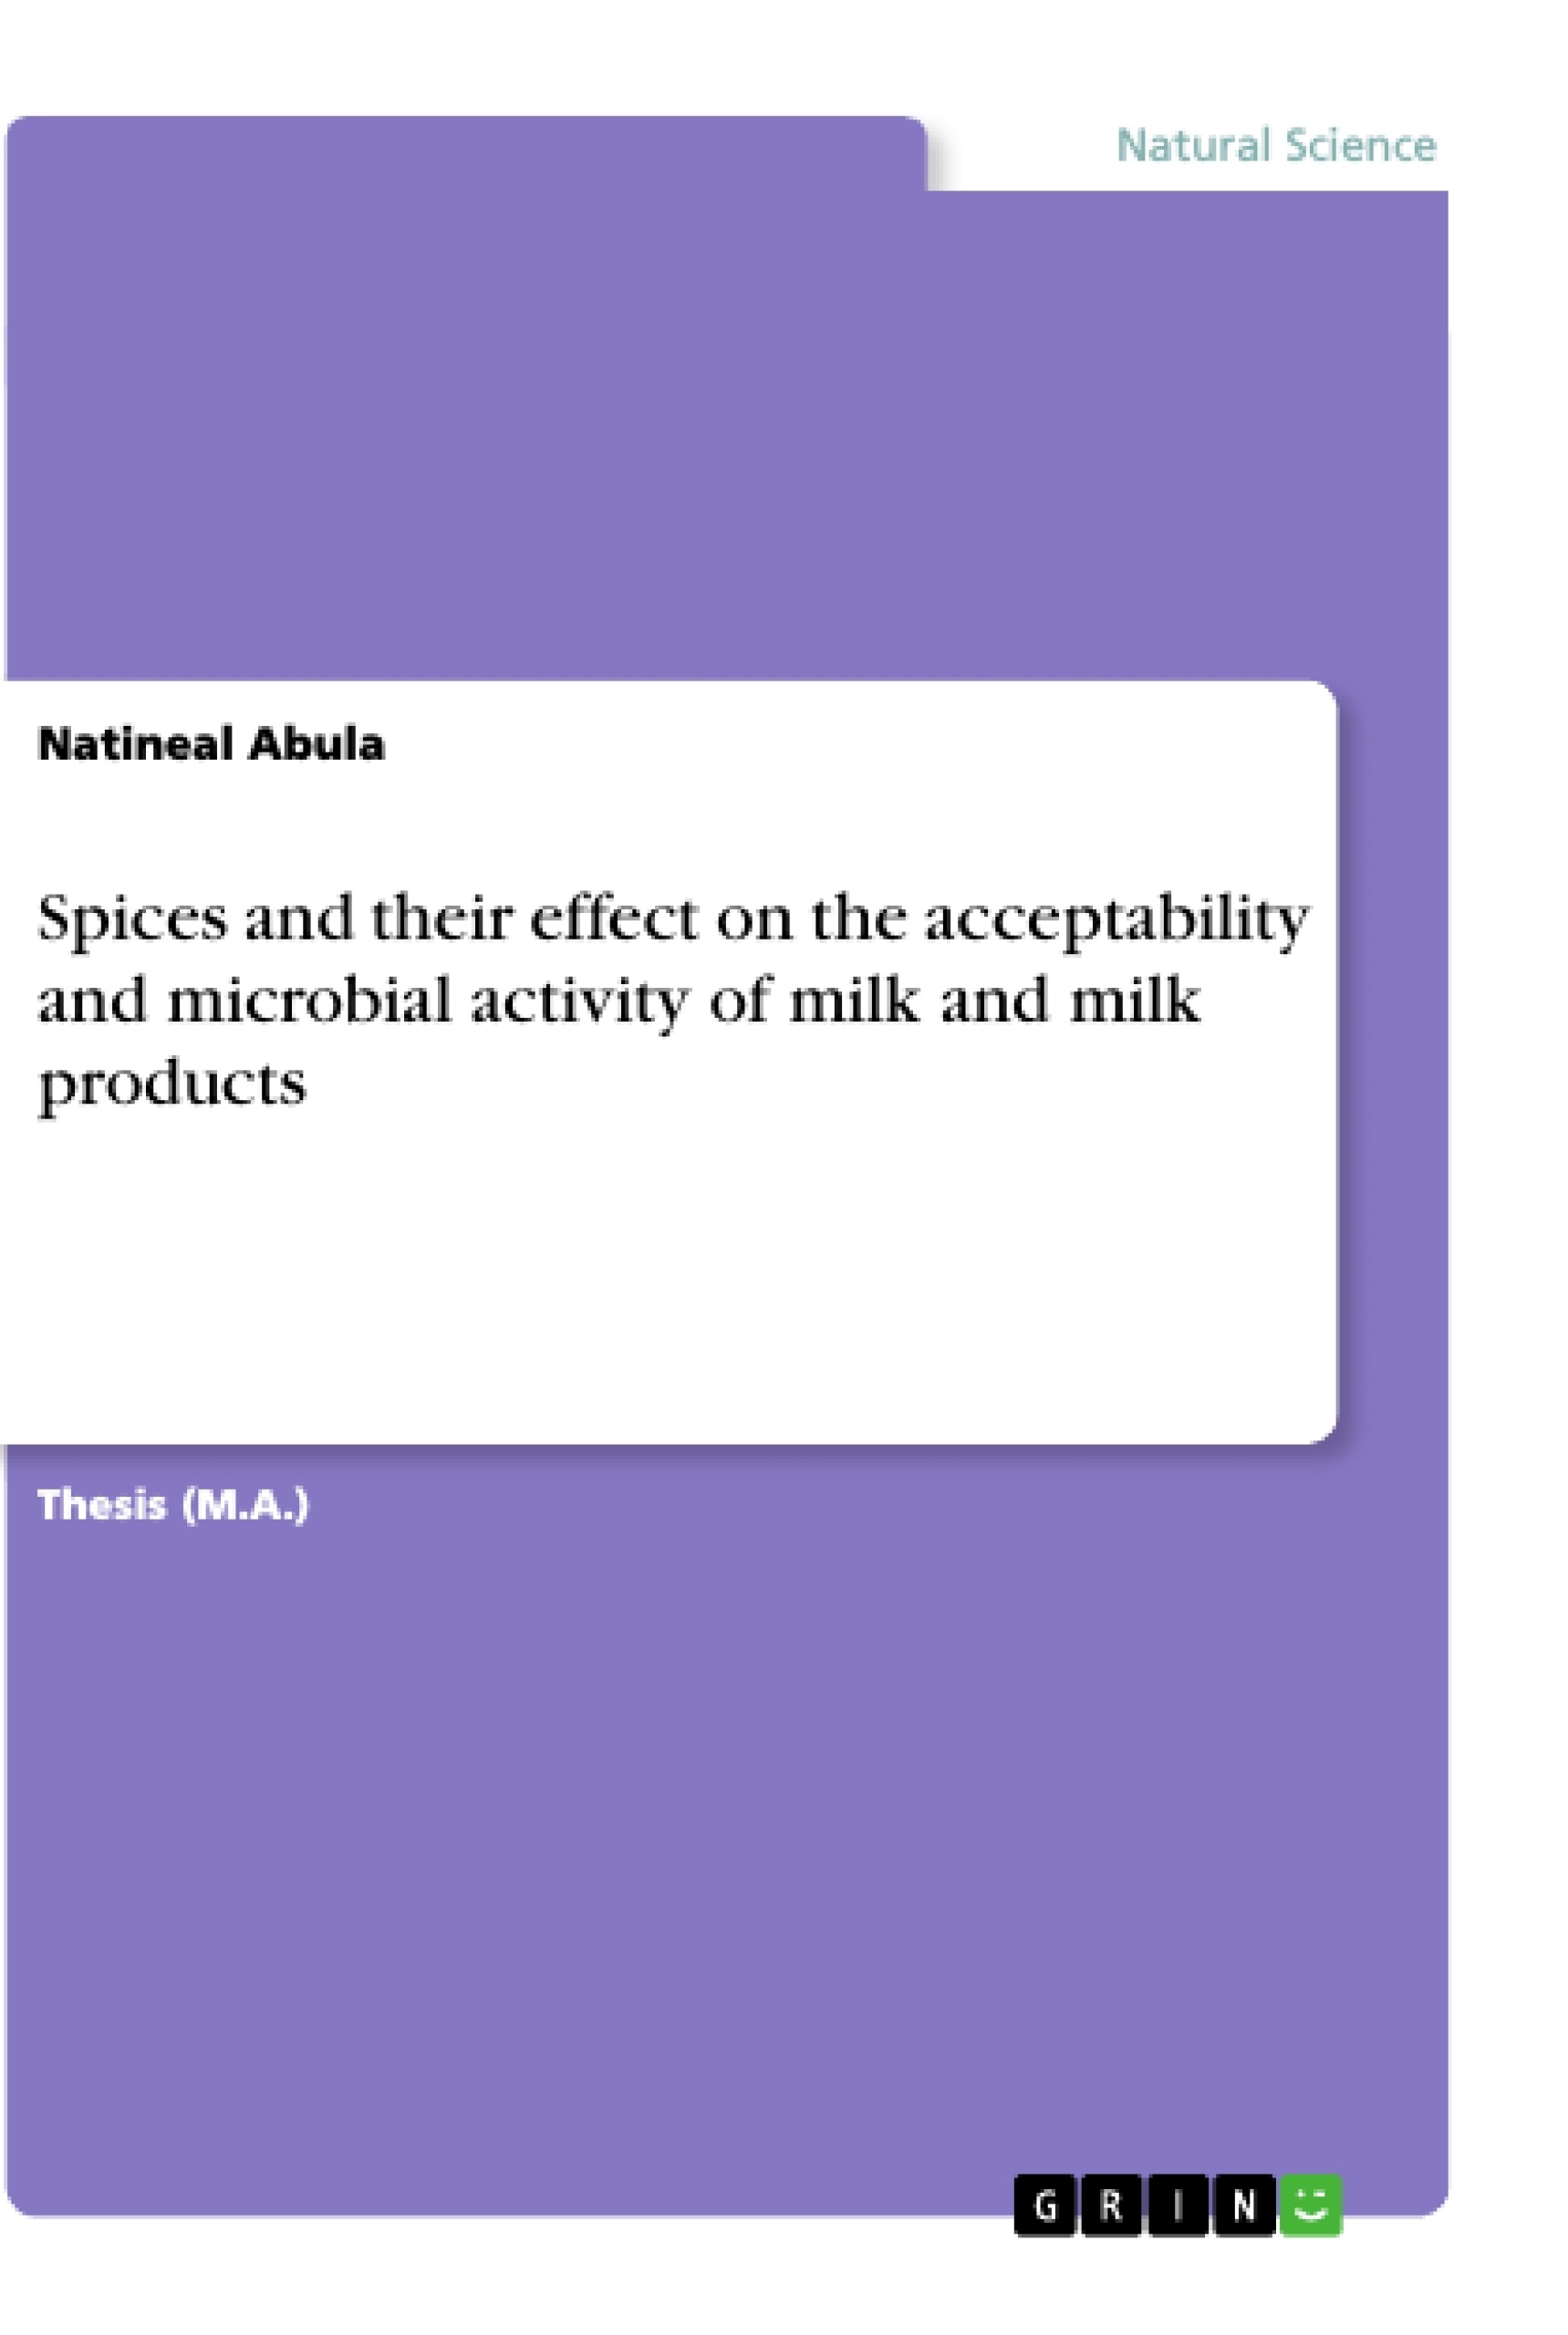 Title: Spices and their effect on the acceptability and microbial activity of milk and milk products